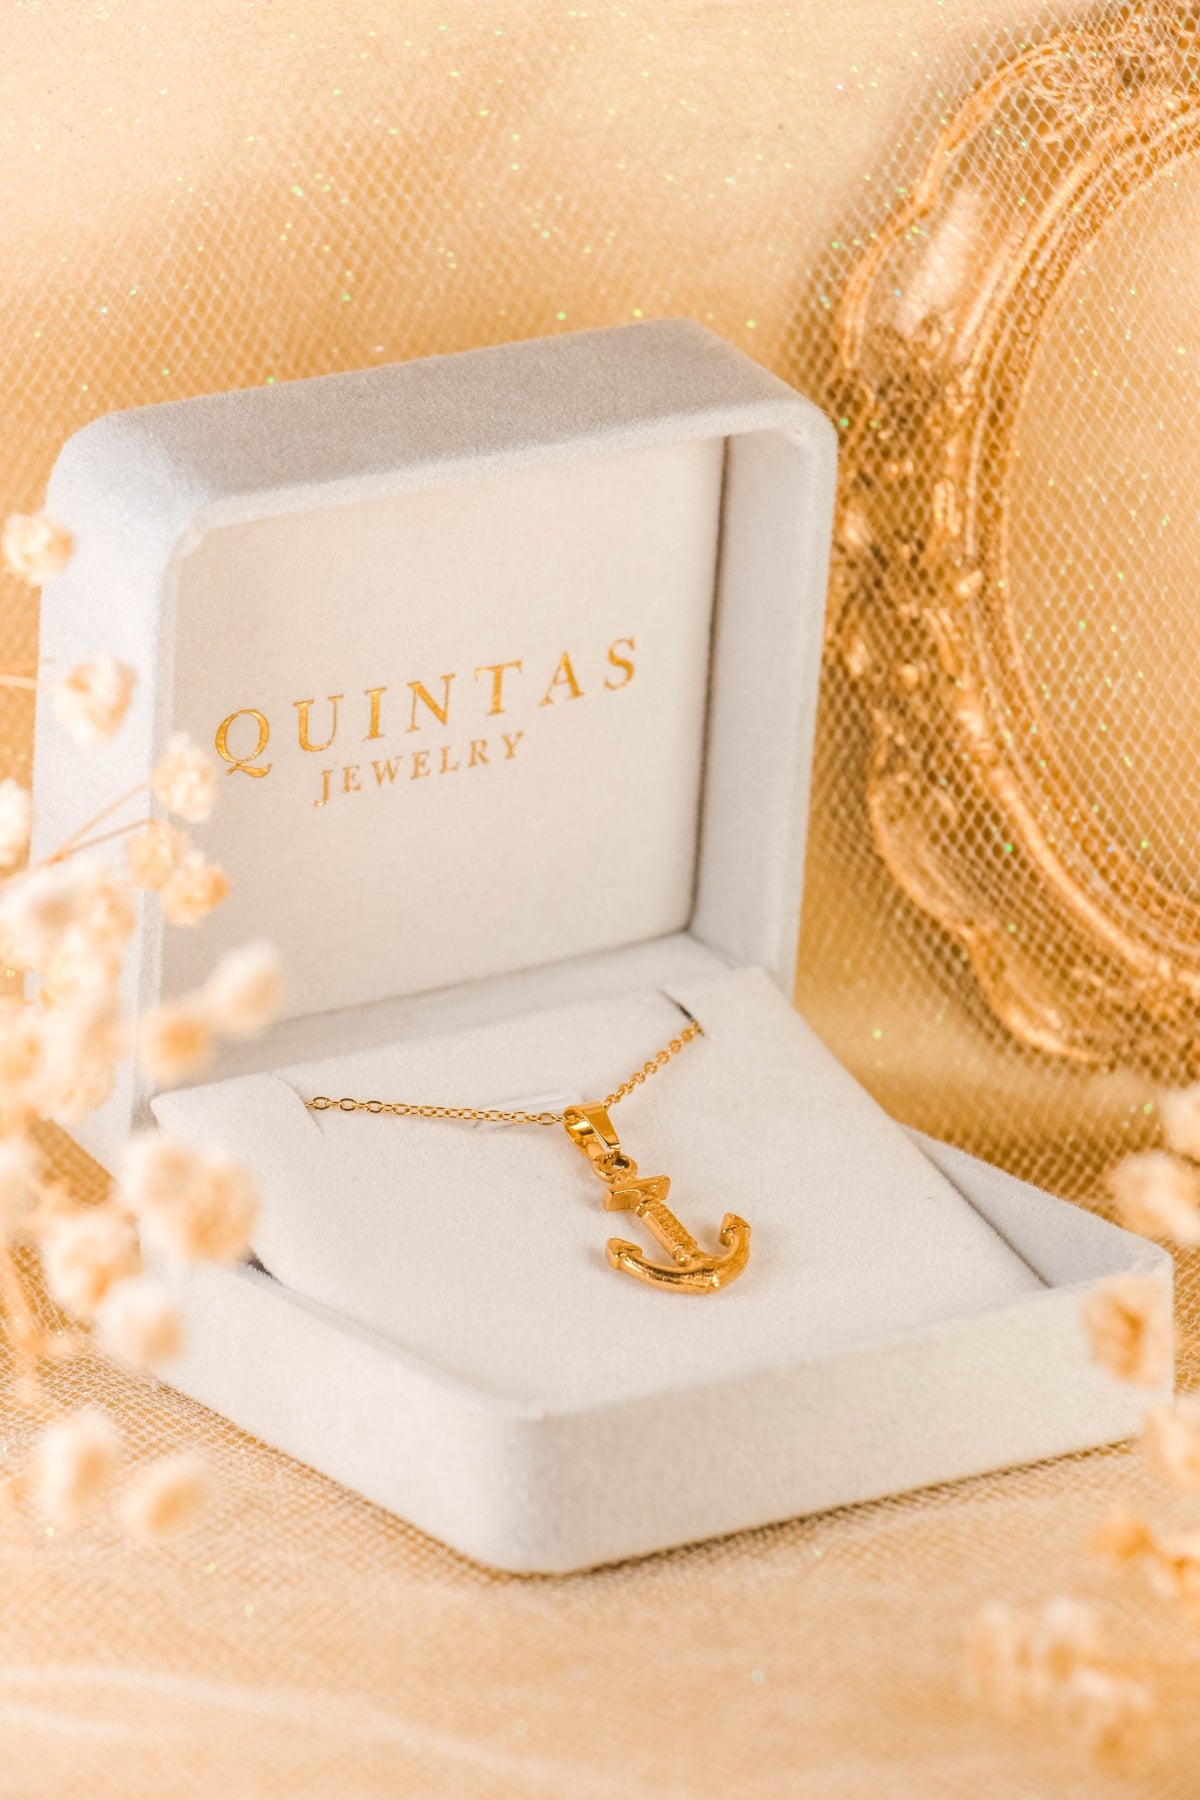 The Classic Anchor Necklace